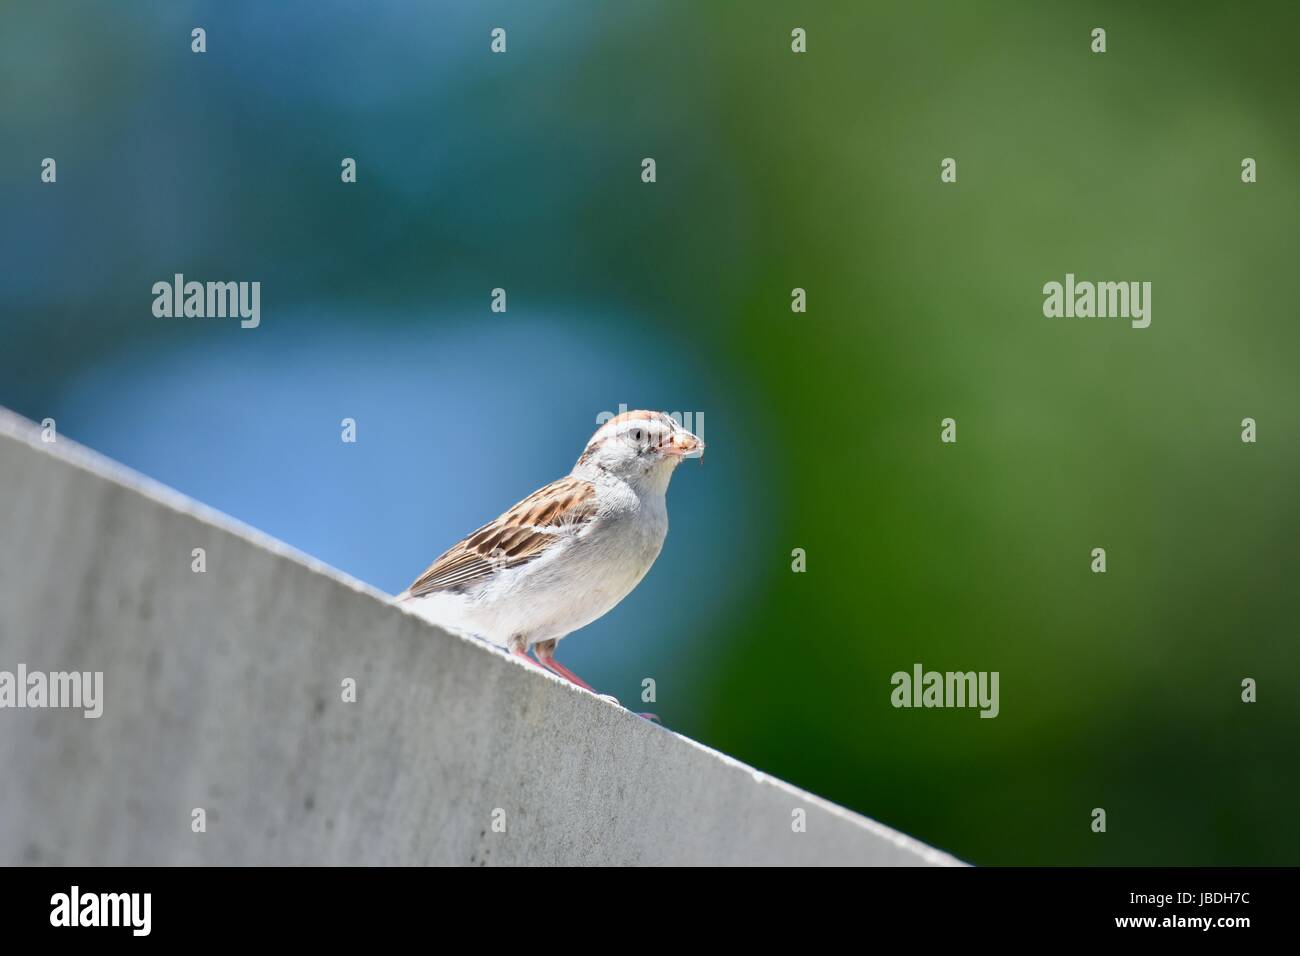 Juvenile chipping sparrow (Spizella passerina) eating an insect Stock Photo